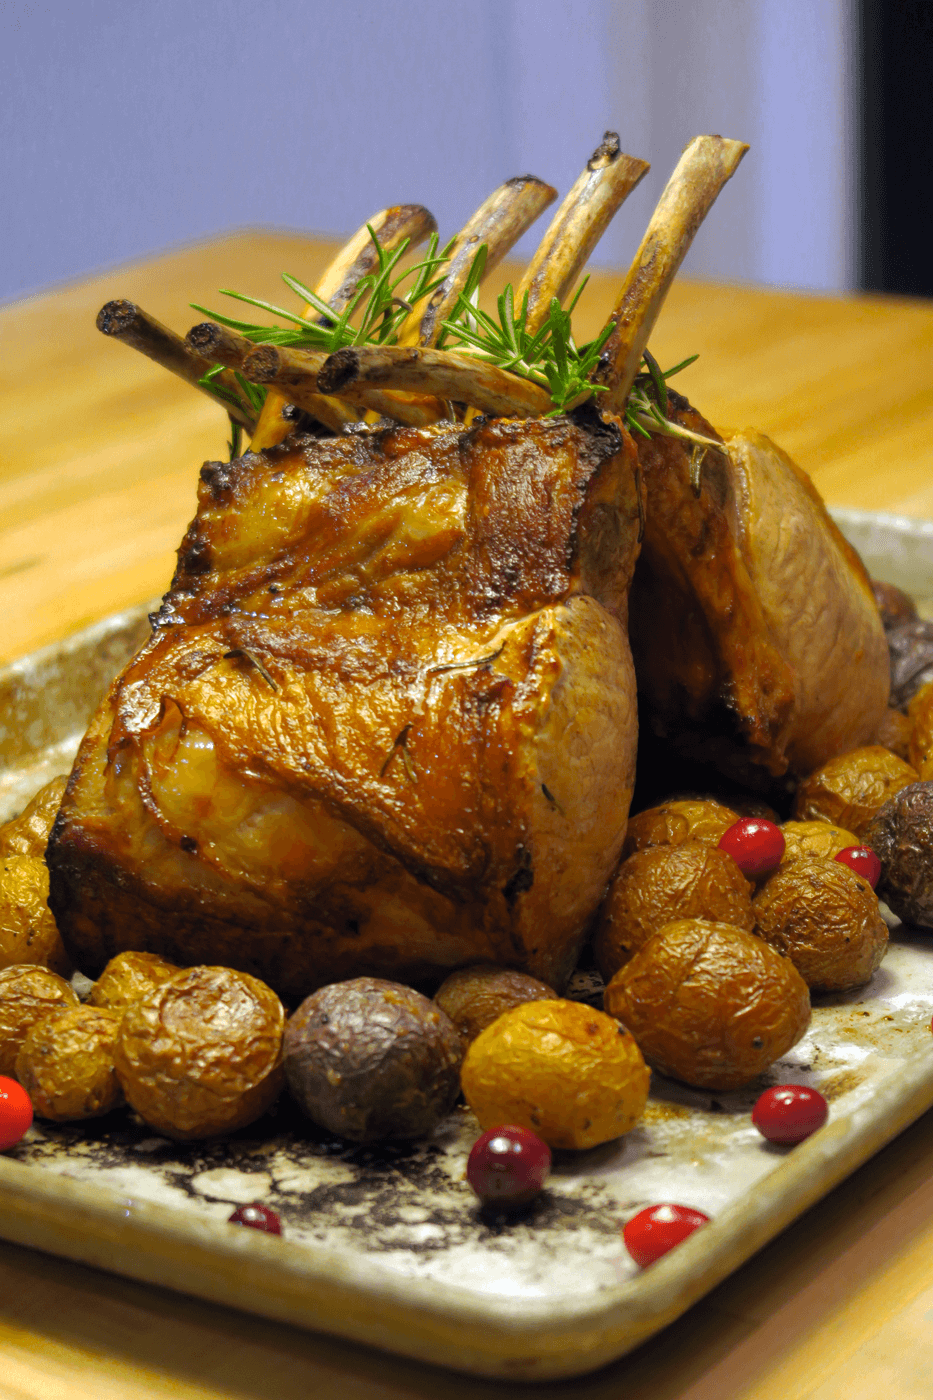 nagano pork rack with cranberries and rosemary sprigs